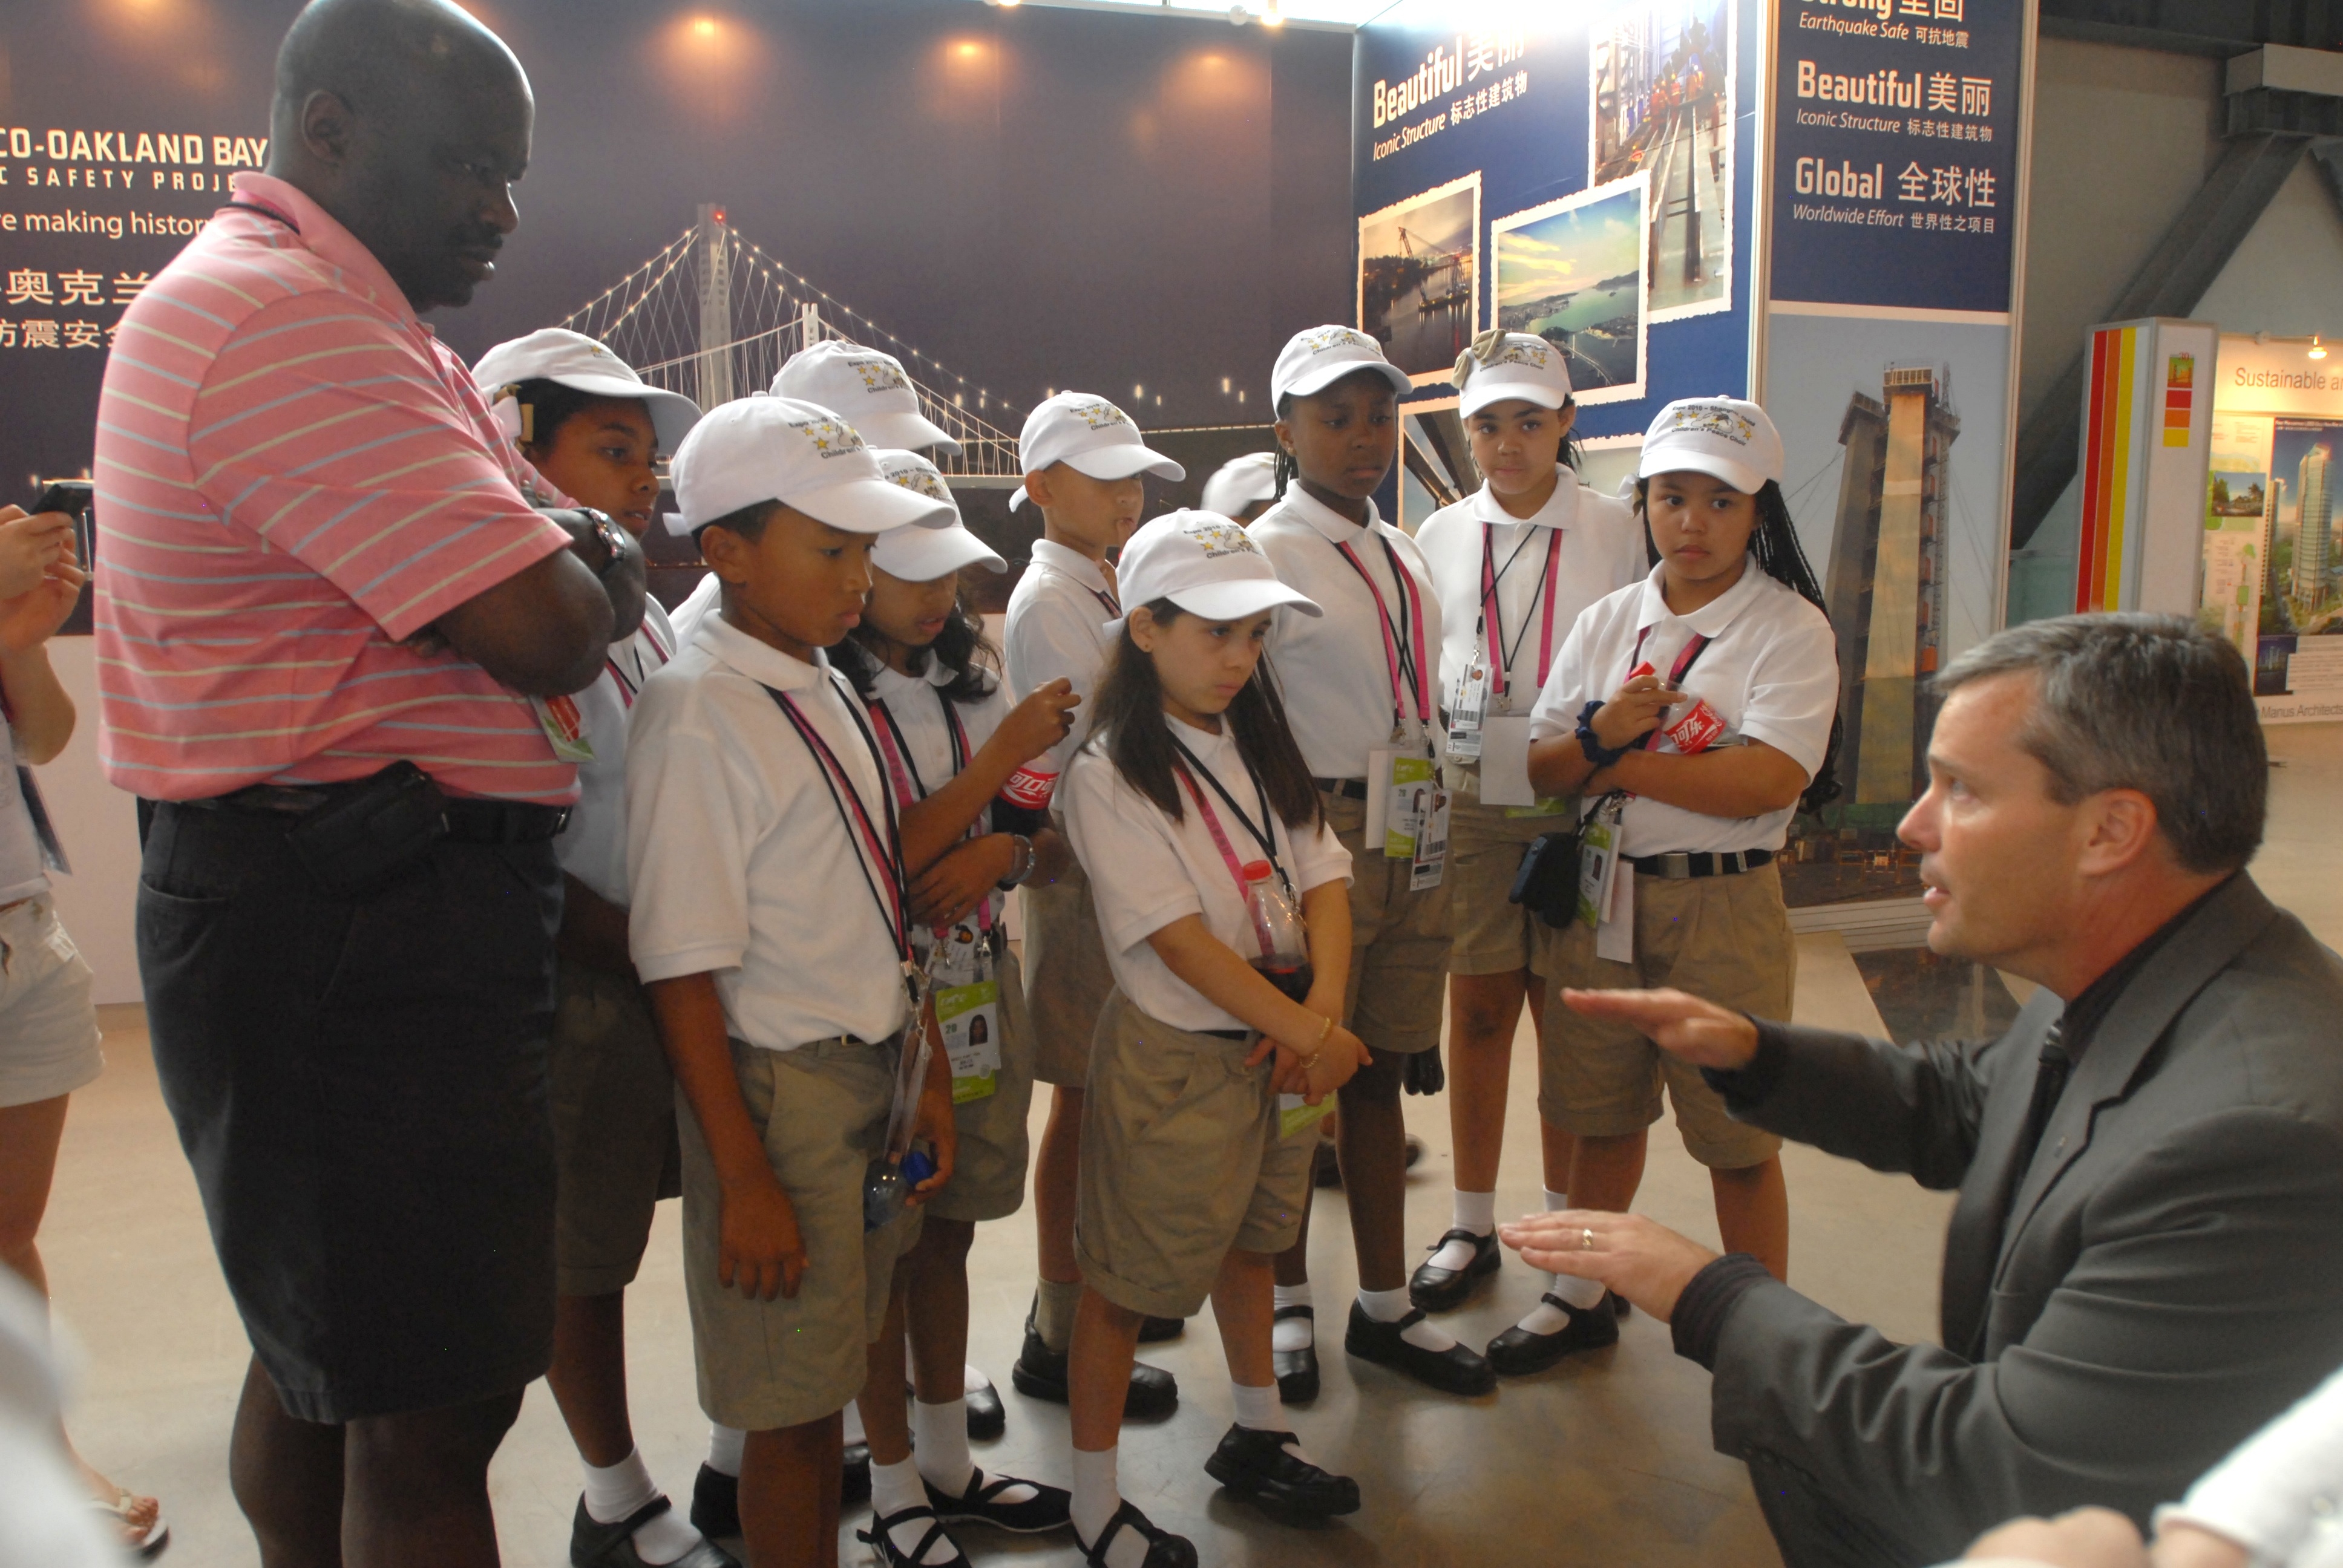 Speaking with the children's choir at the World's Fair in China in 2010.